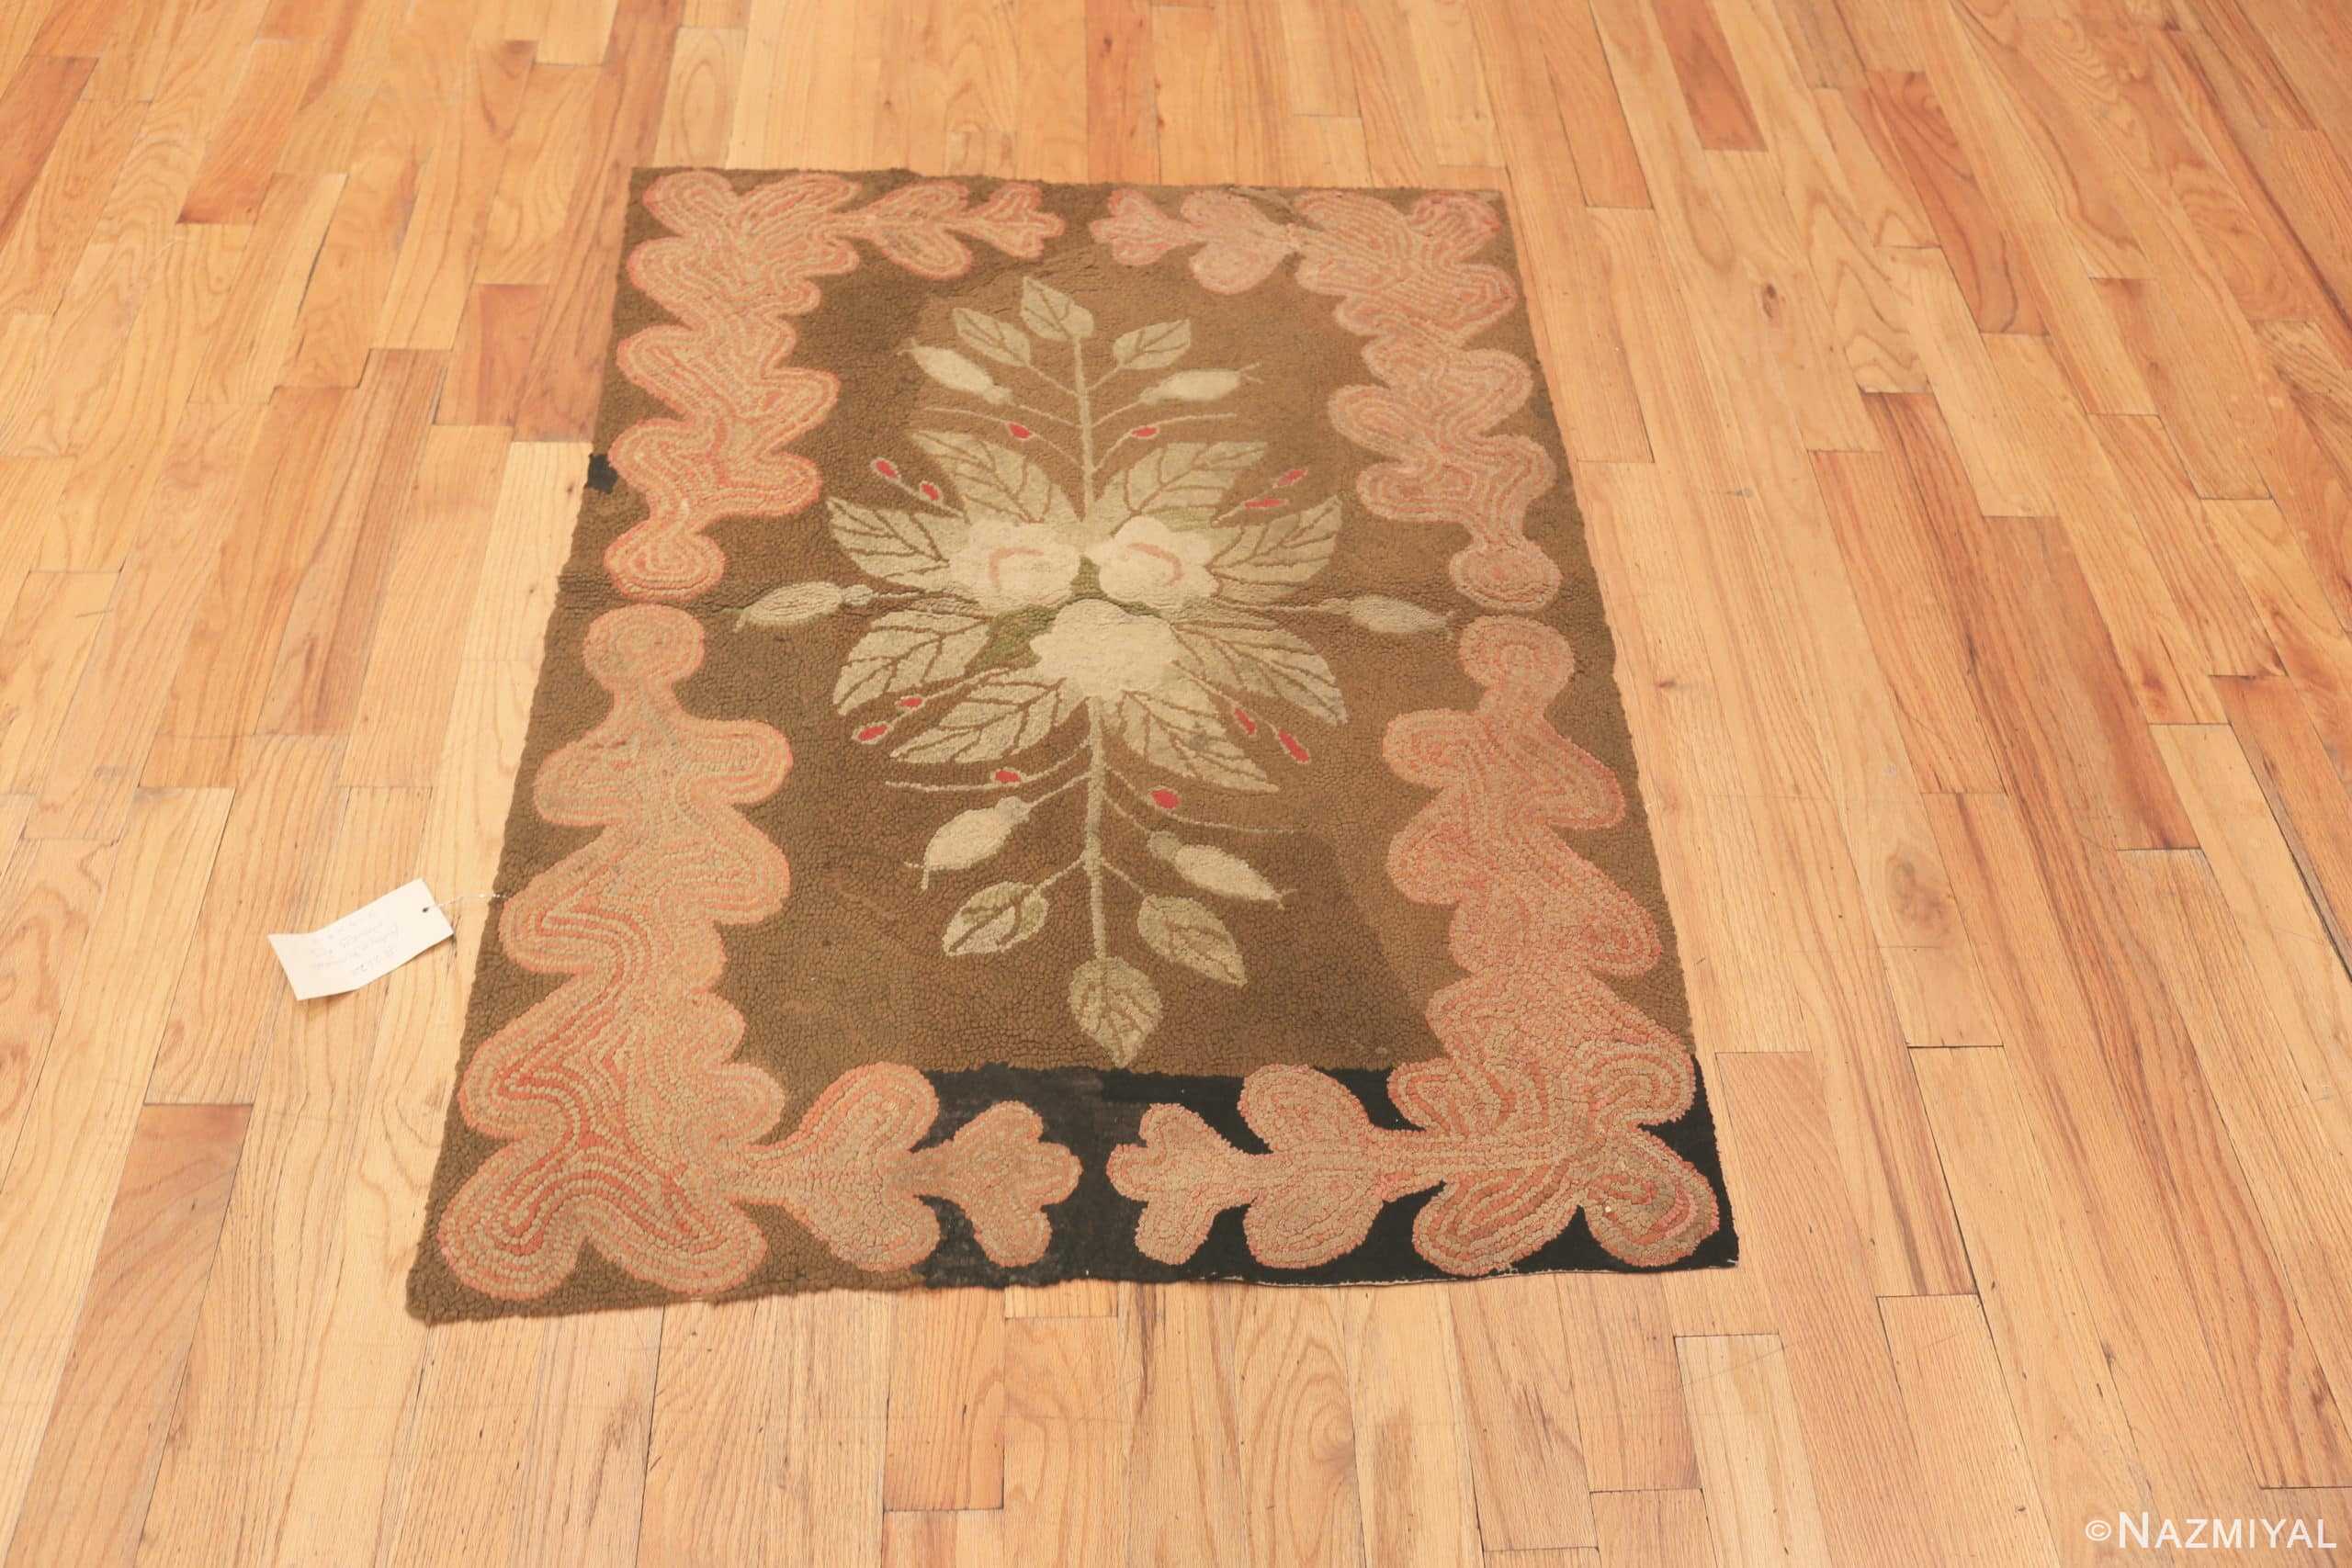 Whole View Of Small Antique Floral Hooked American Rug 2627 by Nazmiyal Antique Rugs